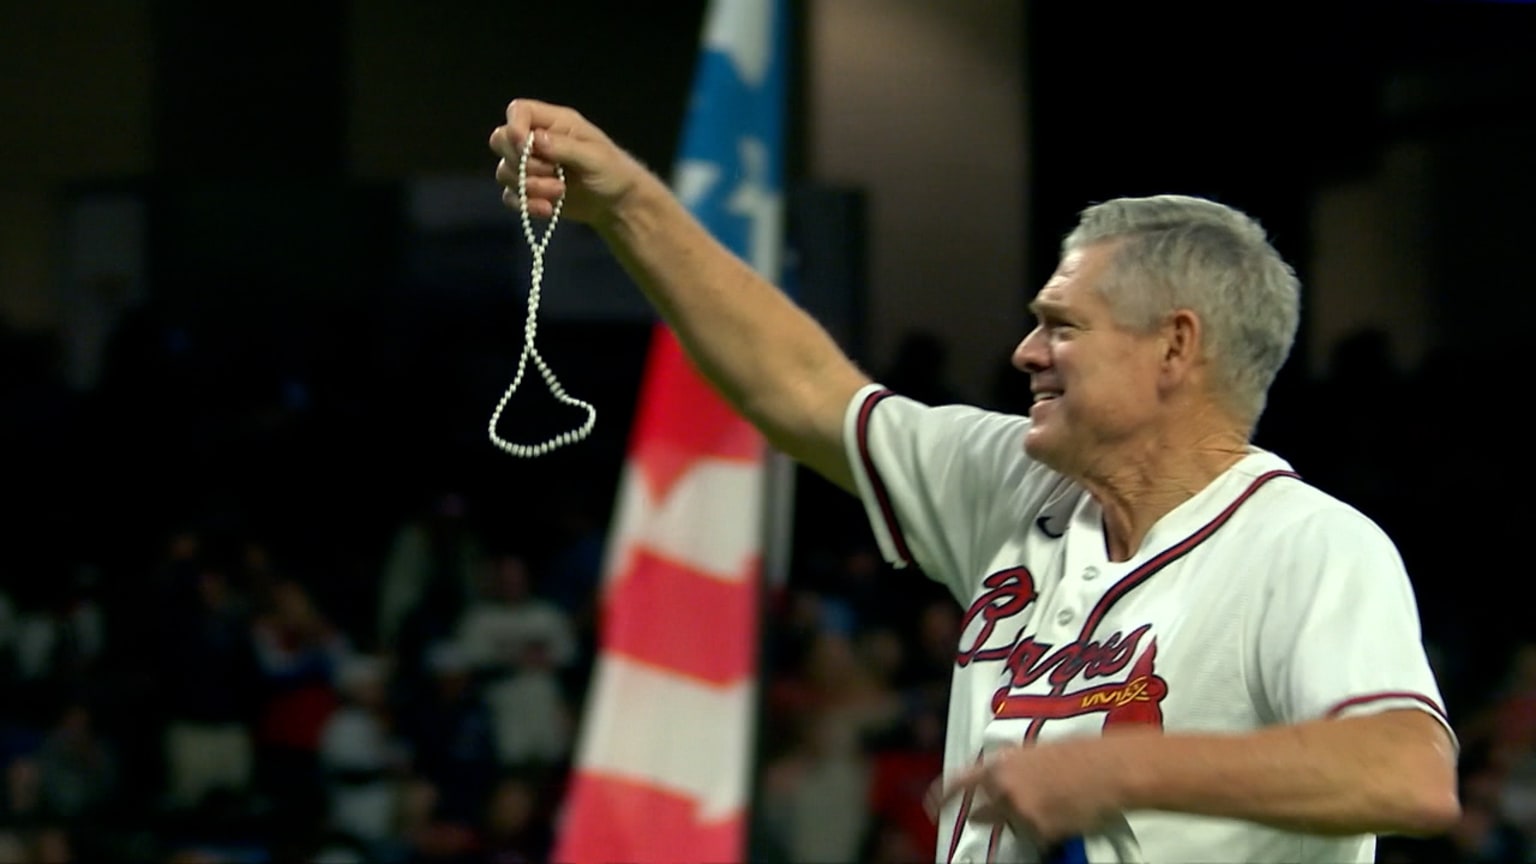 The Case for Dale Murphy – 9 Inning Know It All